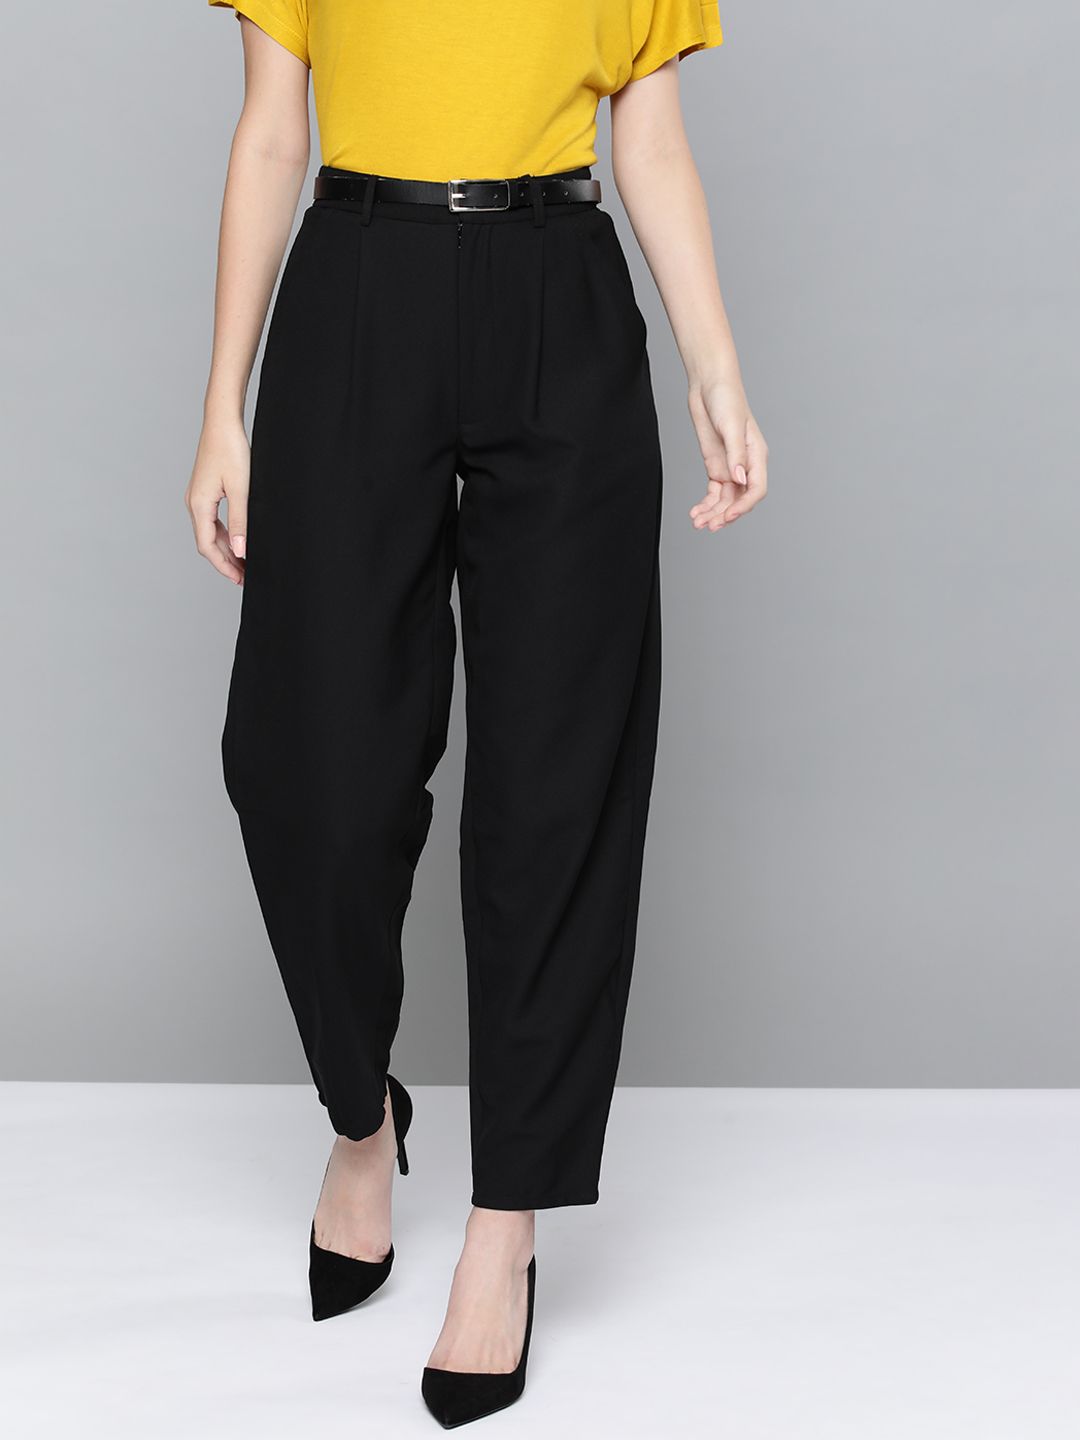 Chemistry Women Black Pleated Formal Trousers & Belt Price in India